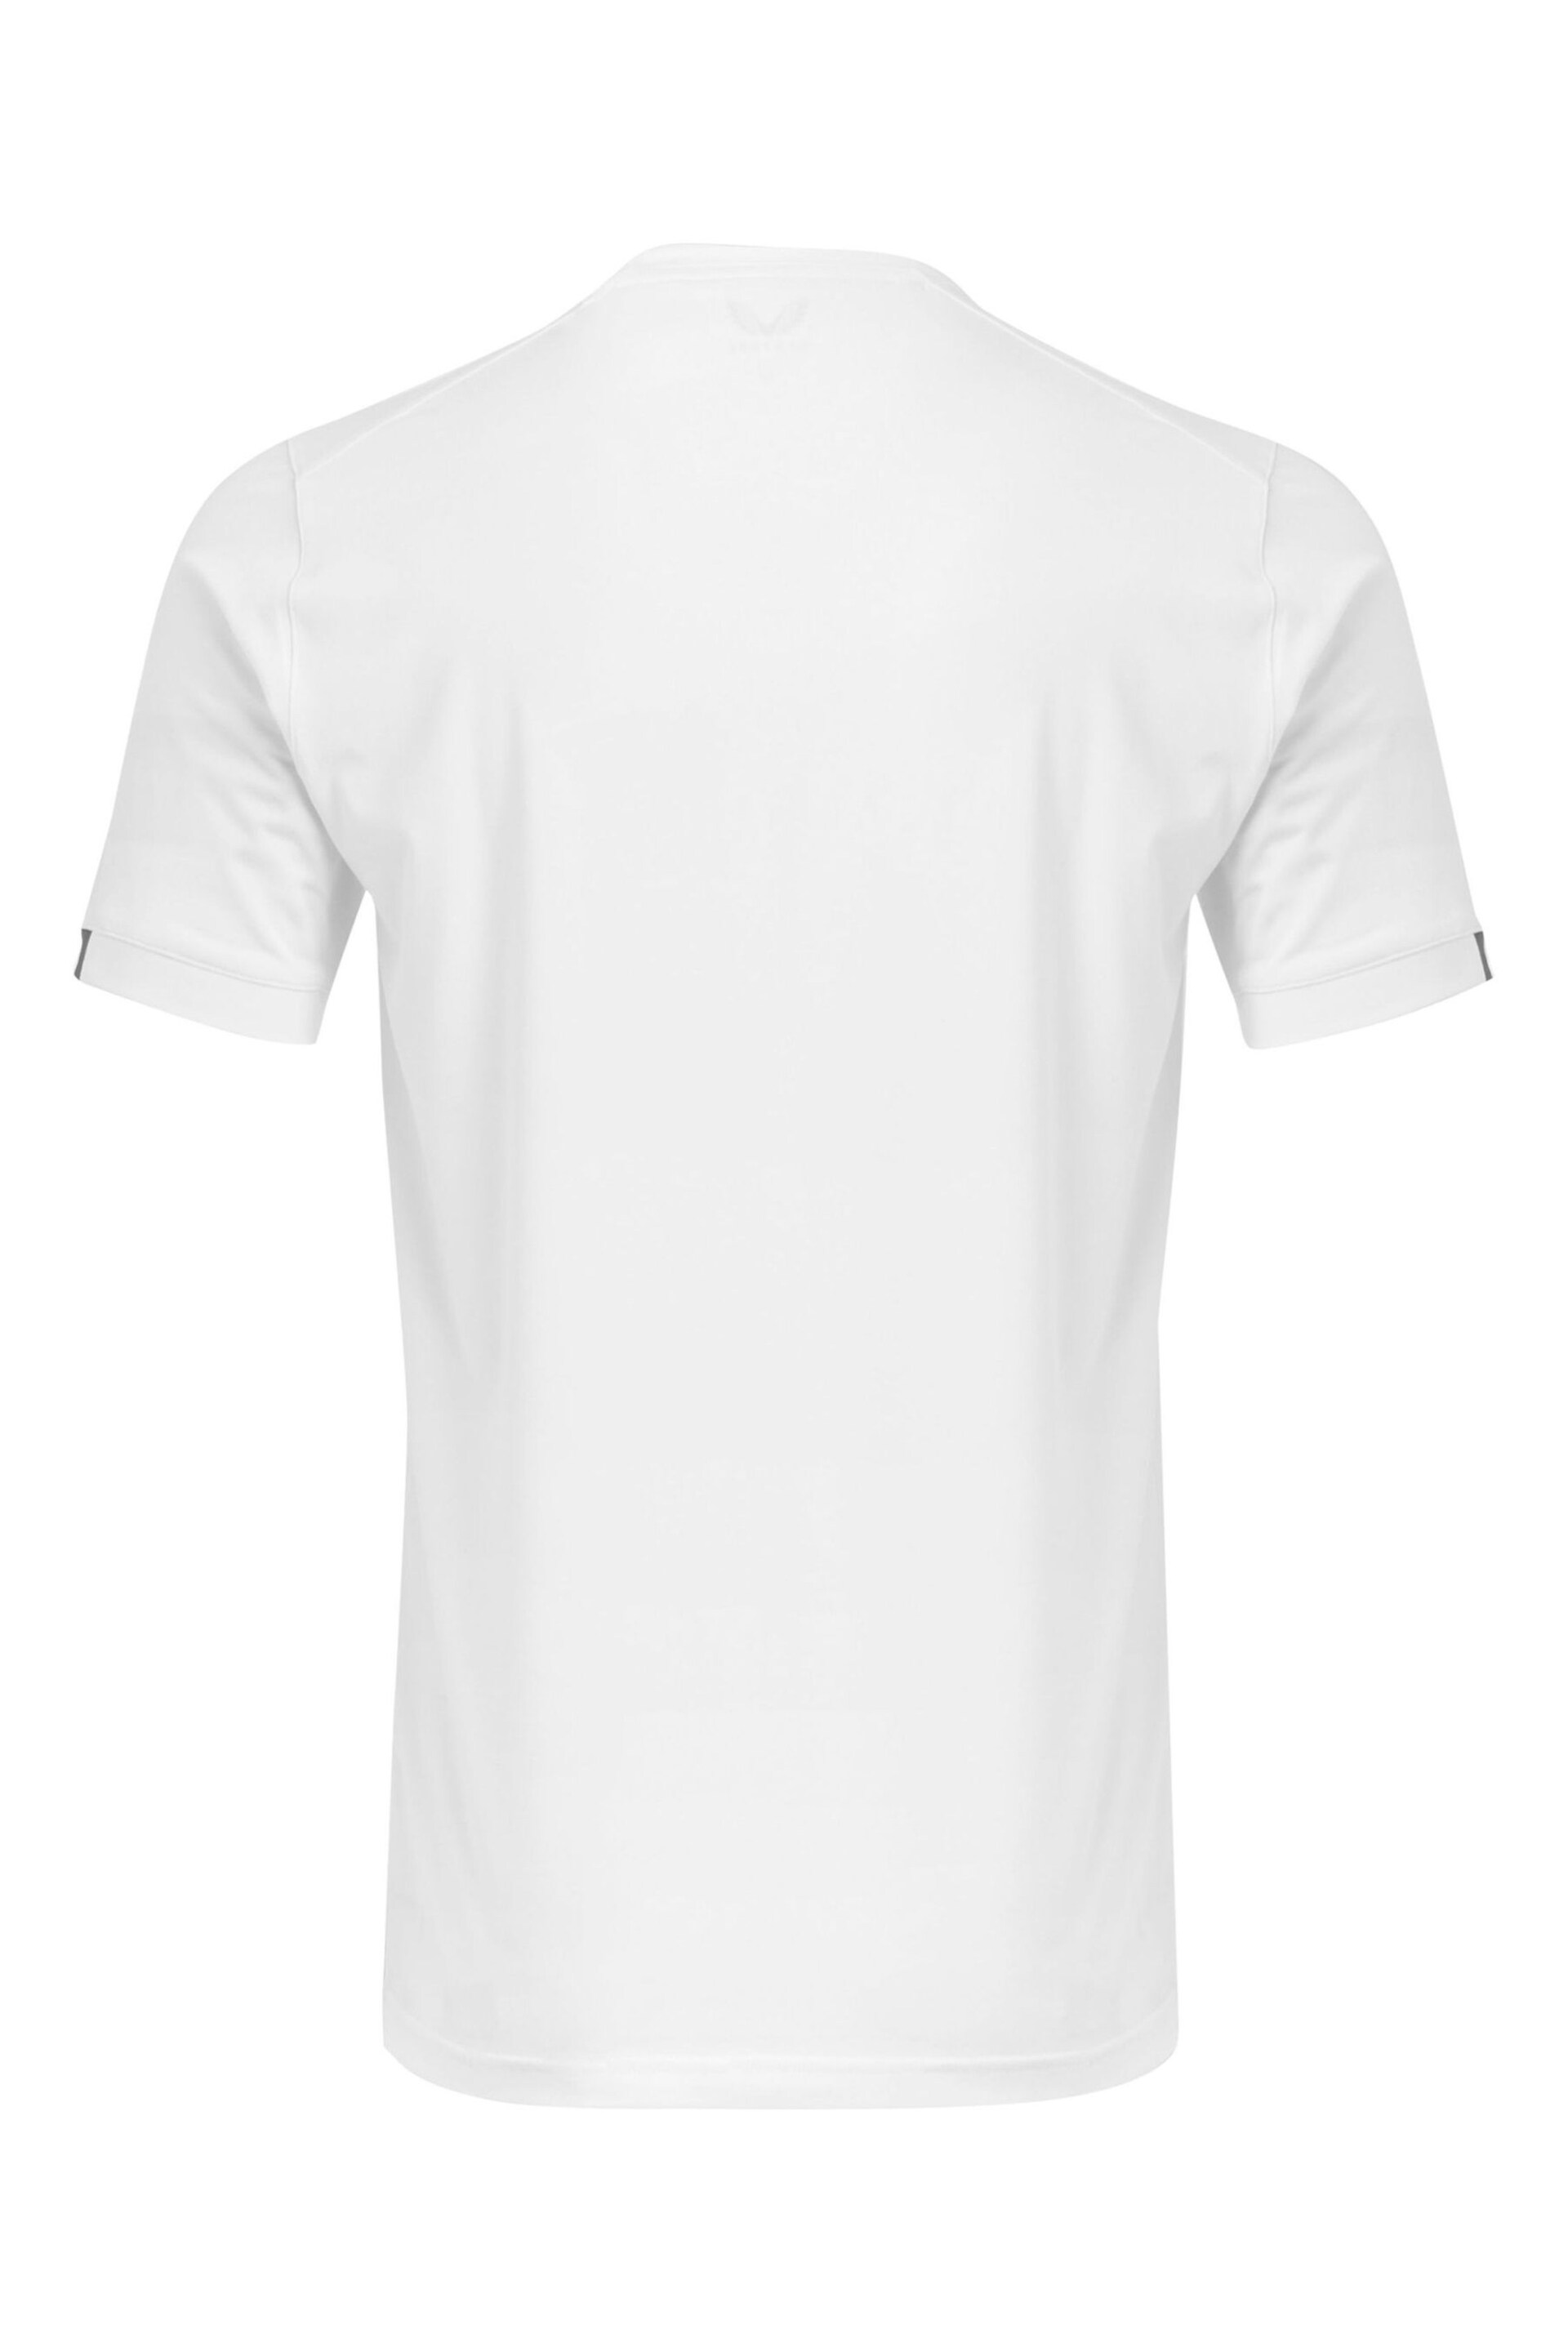 Castore Glasgow Rangers Players Travel White T-Shirt - Image 3 of 3